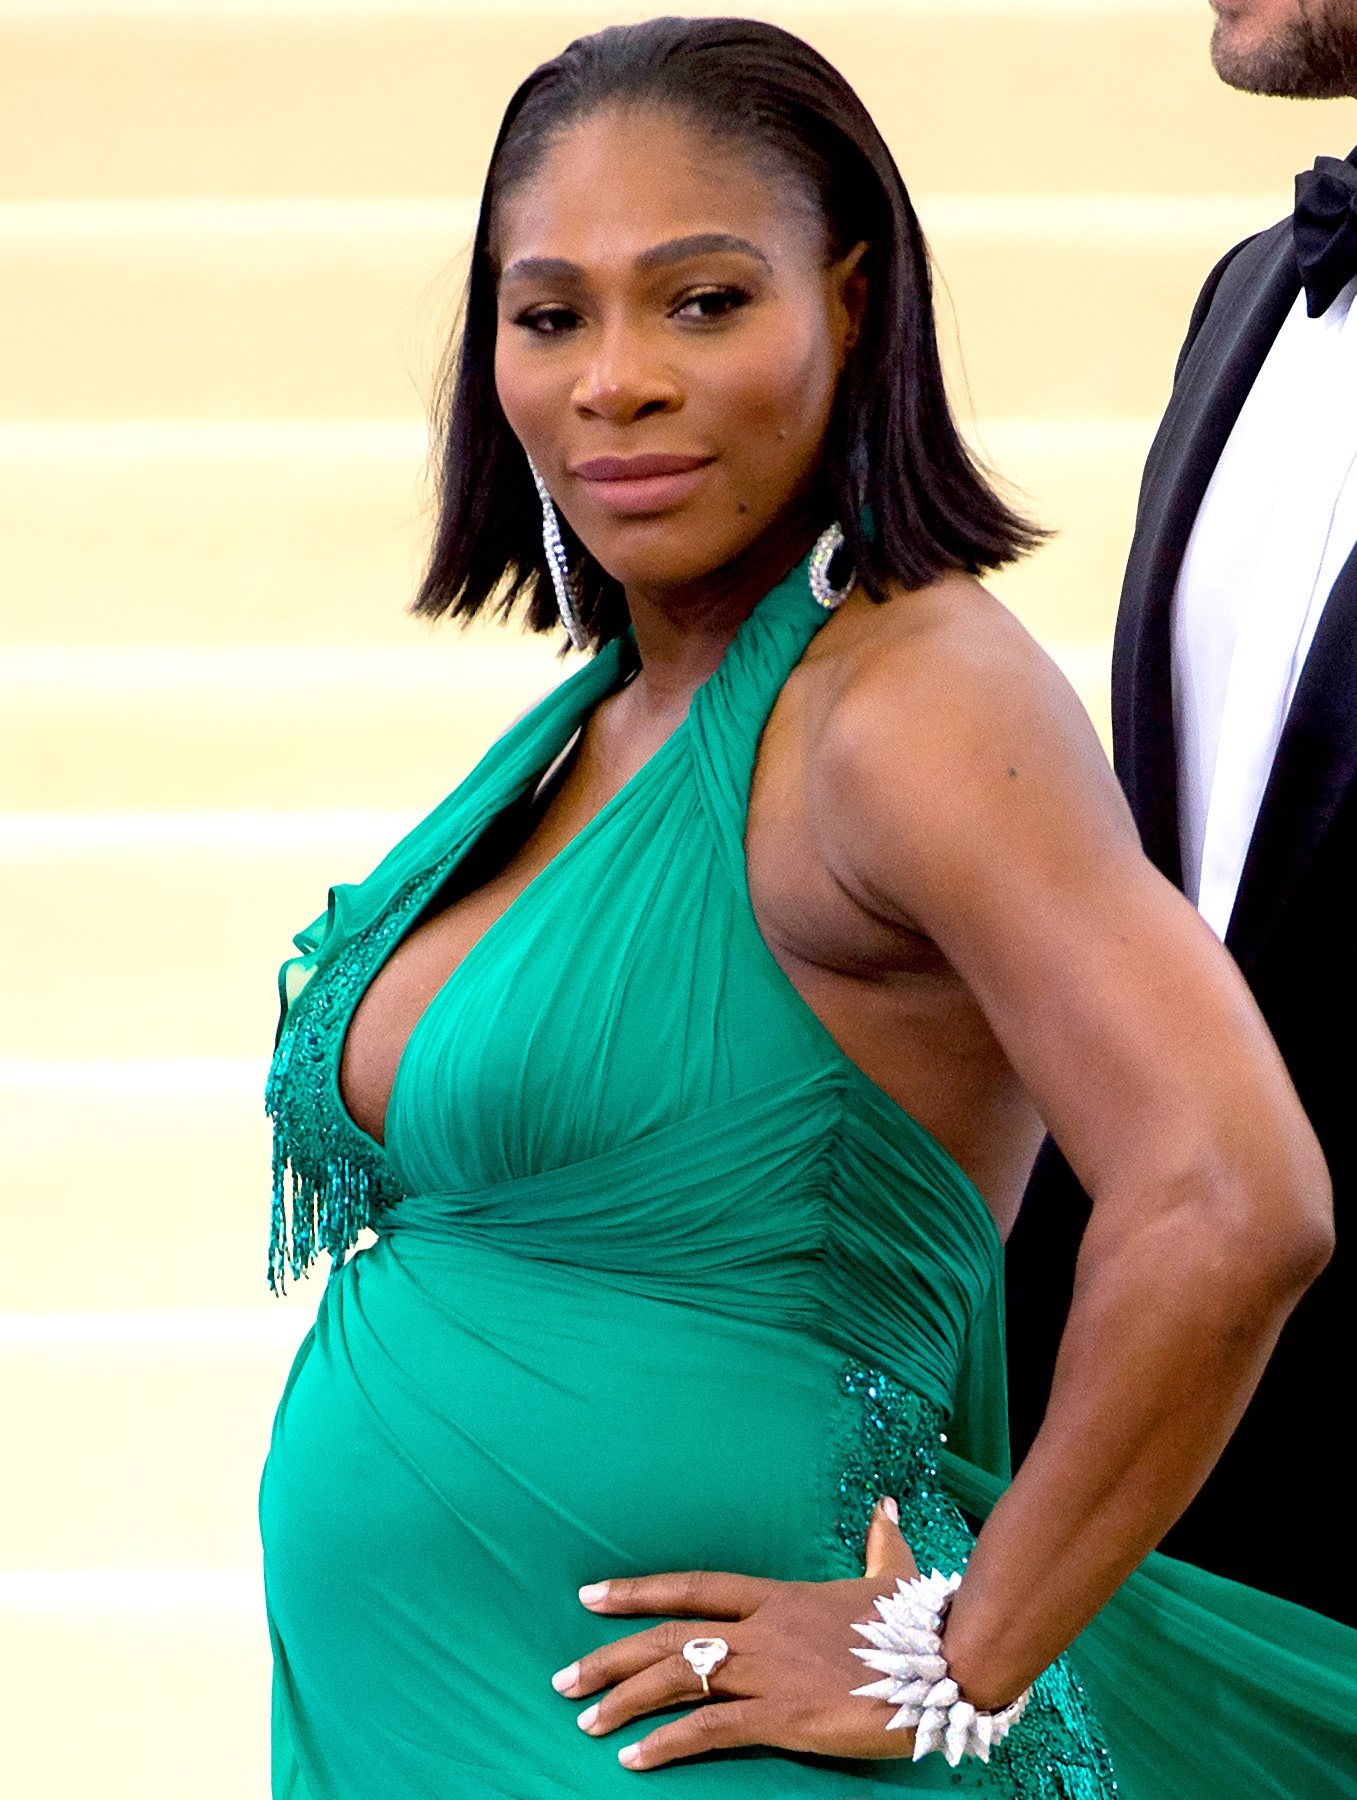 Serena Williams Was Terrified of Getting Pregnant, Talks Delivery Fears